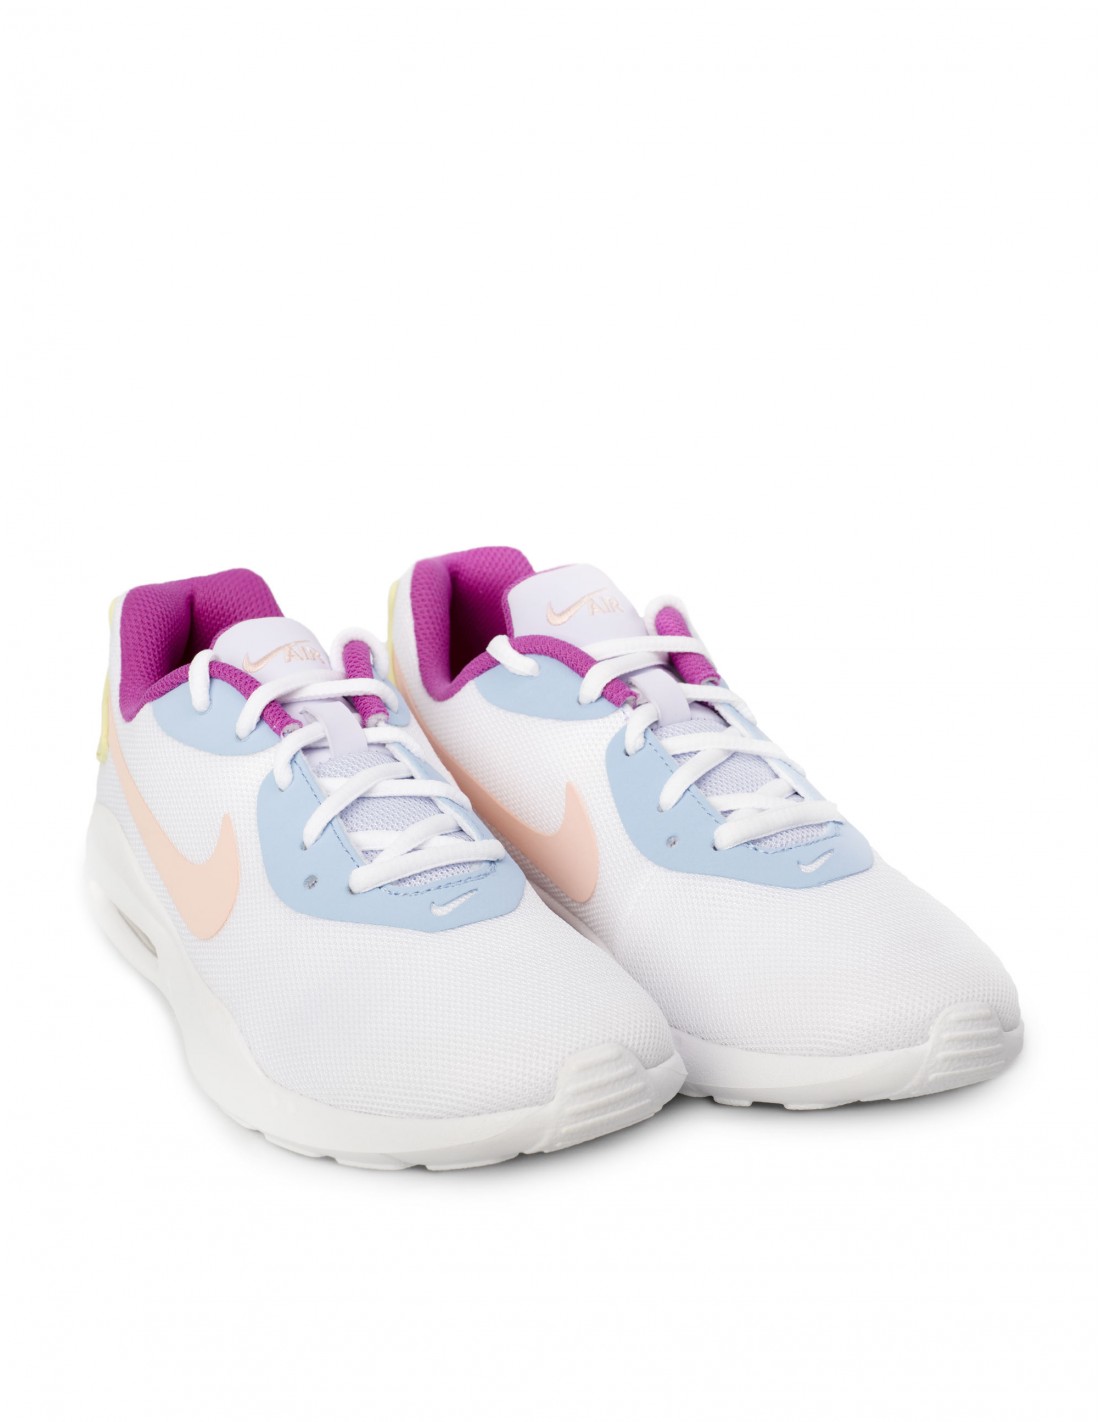 nike zoom colores